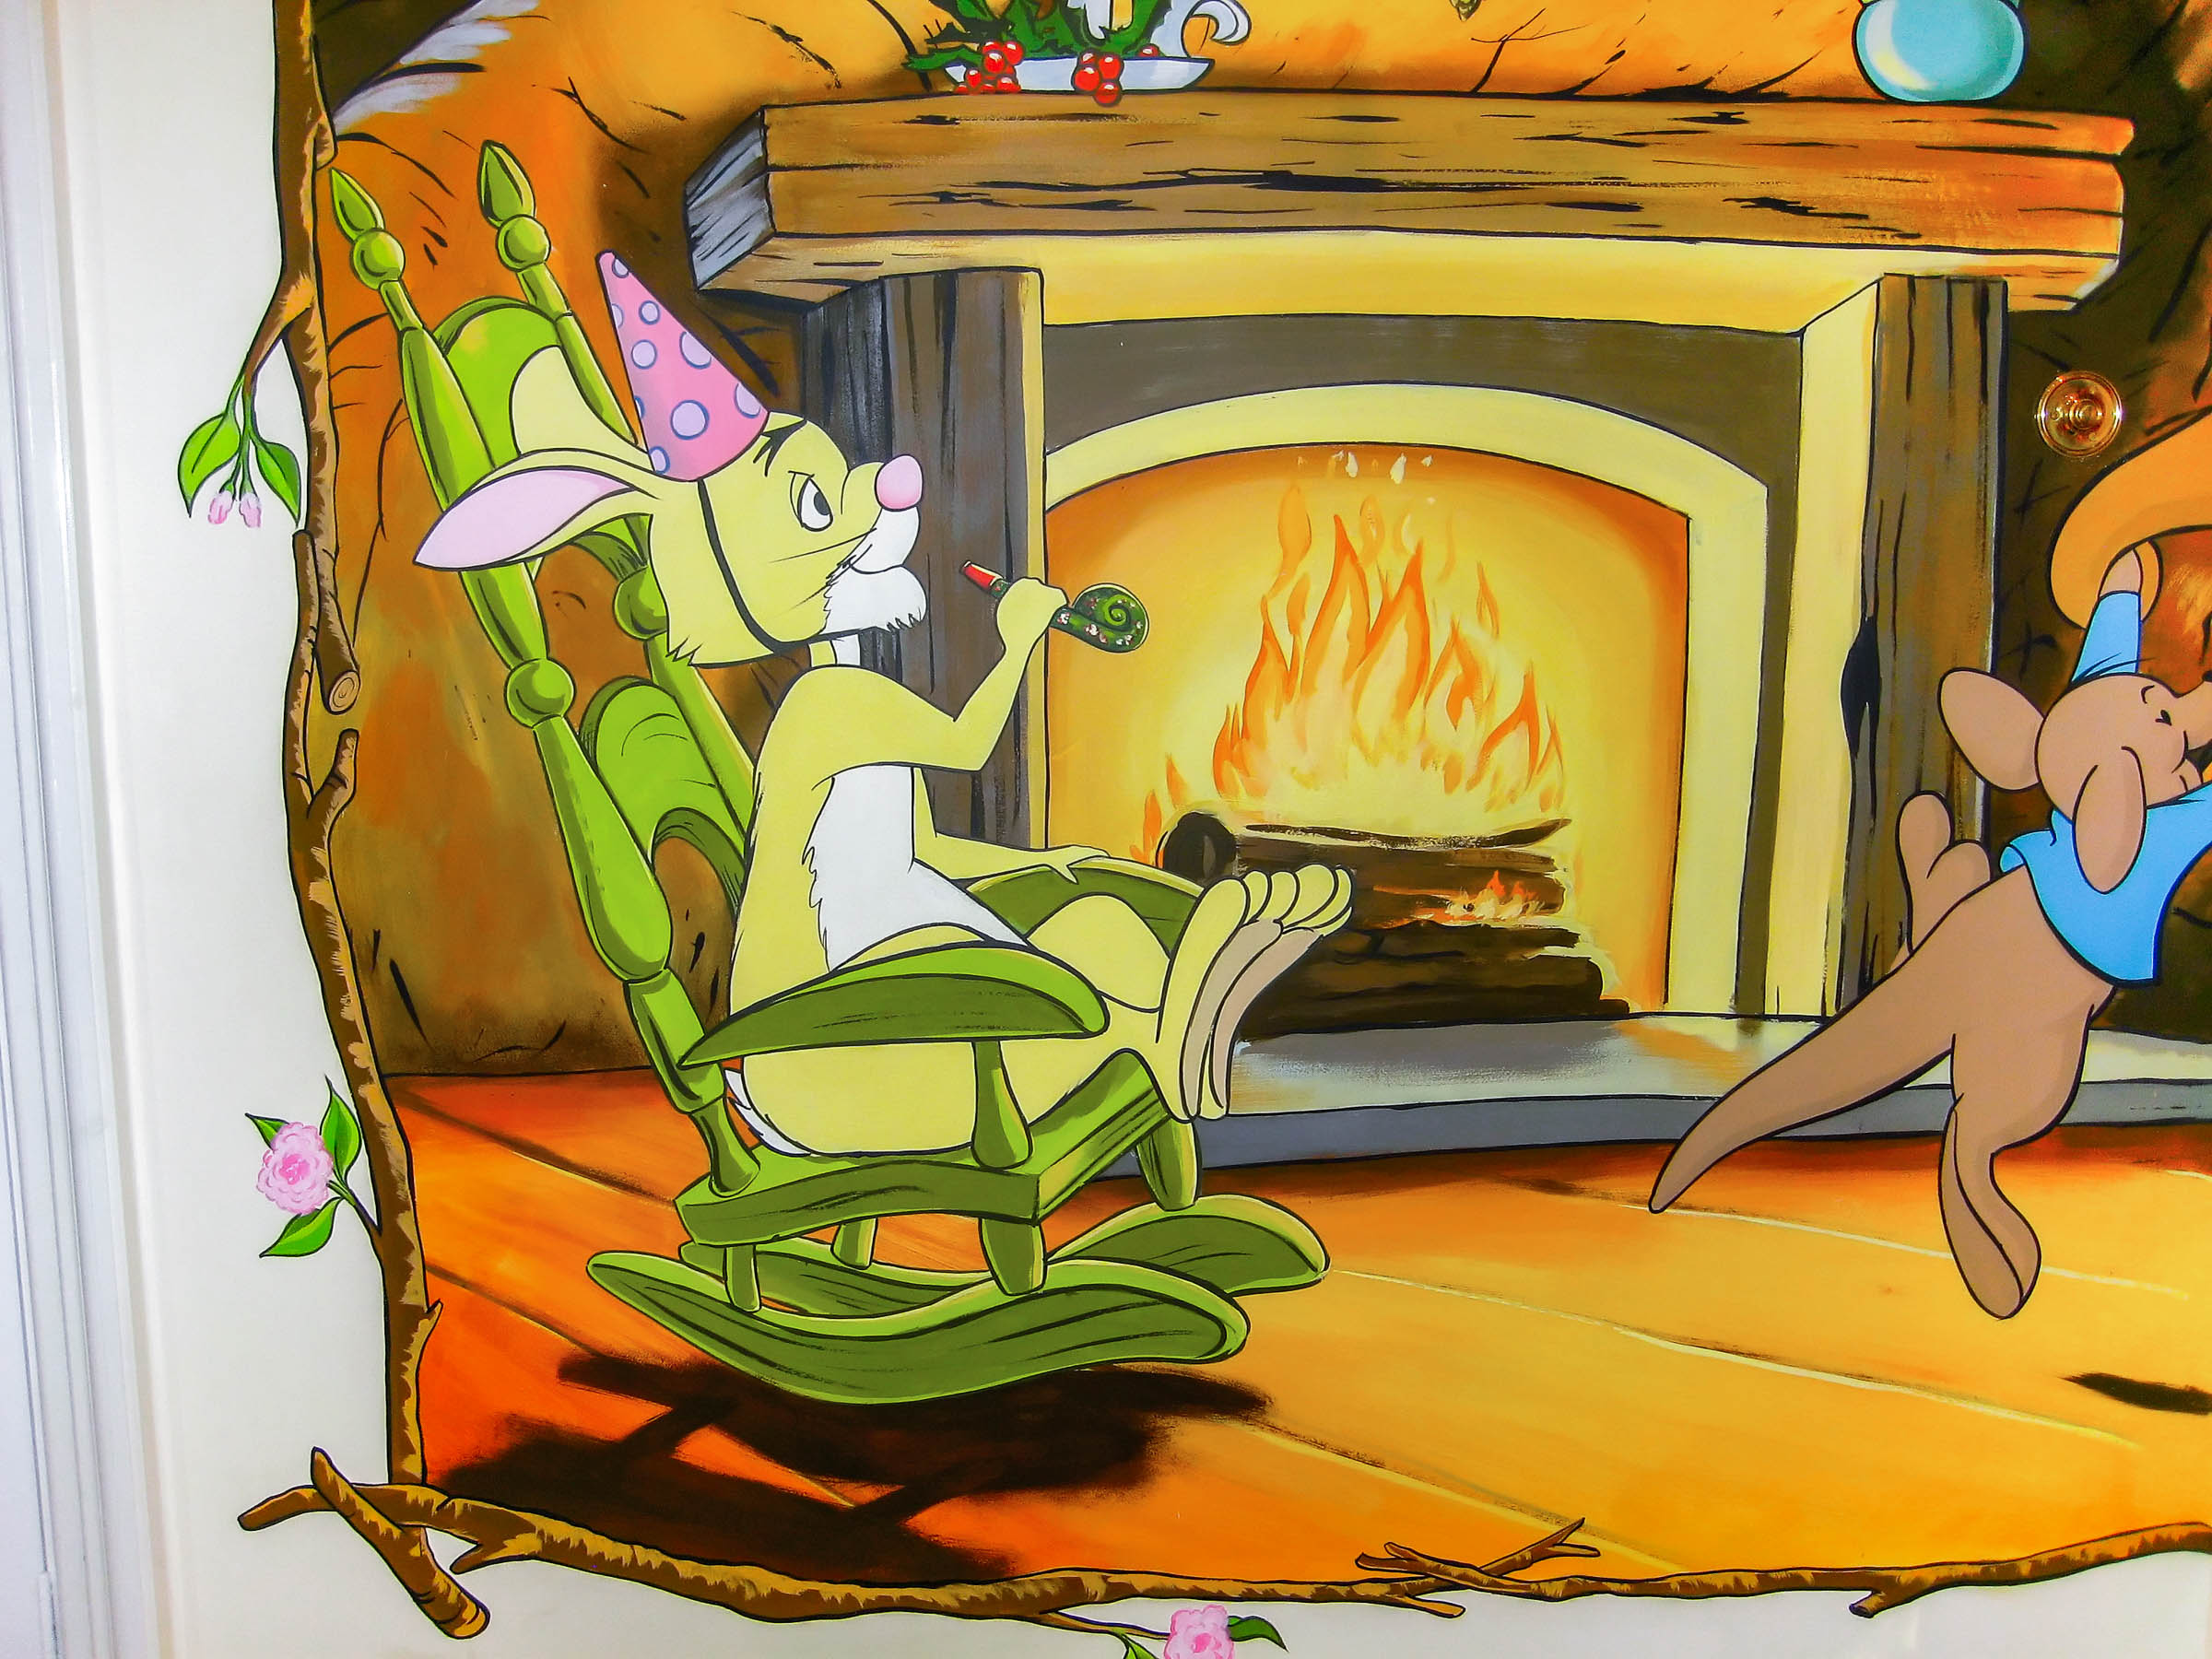 rabbit-in-party-hat-rocking-chair-log-fire-twig-frame-mural